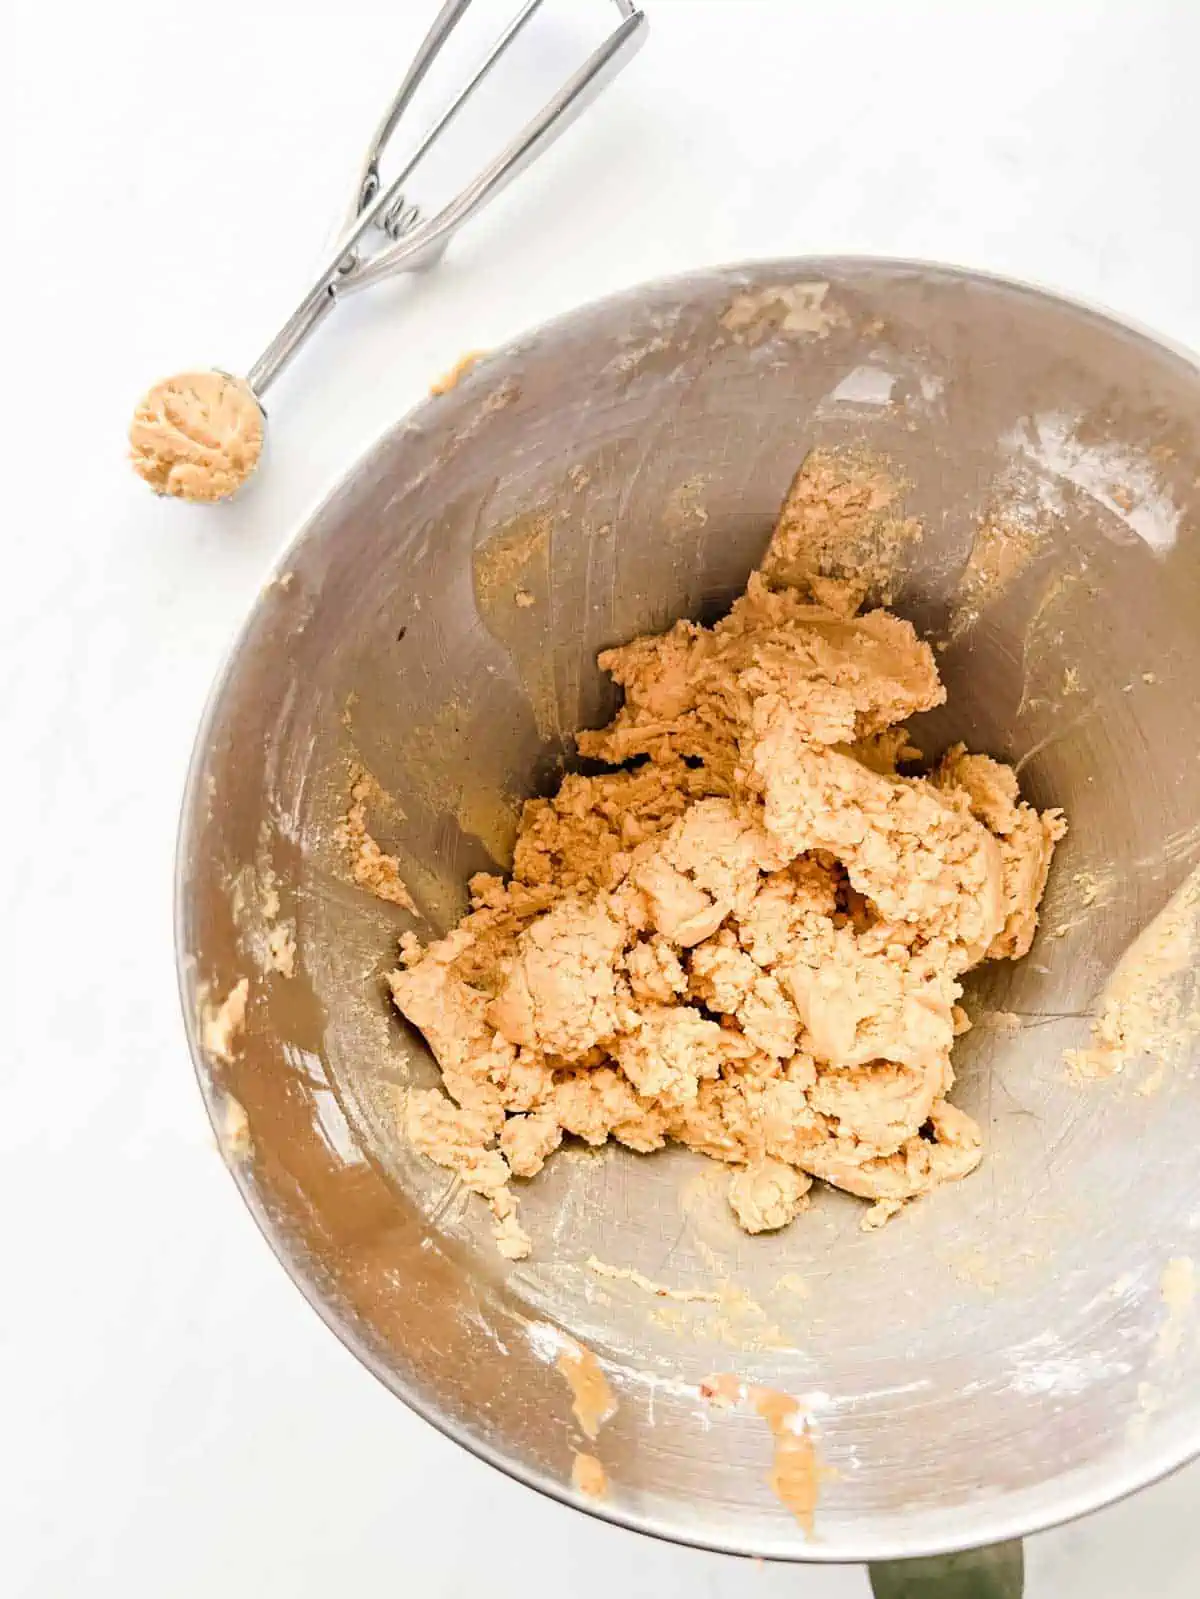 The bowl of a stand mixer with air fryer peanut butter cookies in it and a cookie scoop next to it.